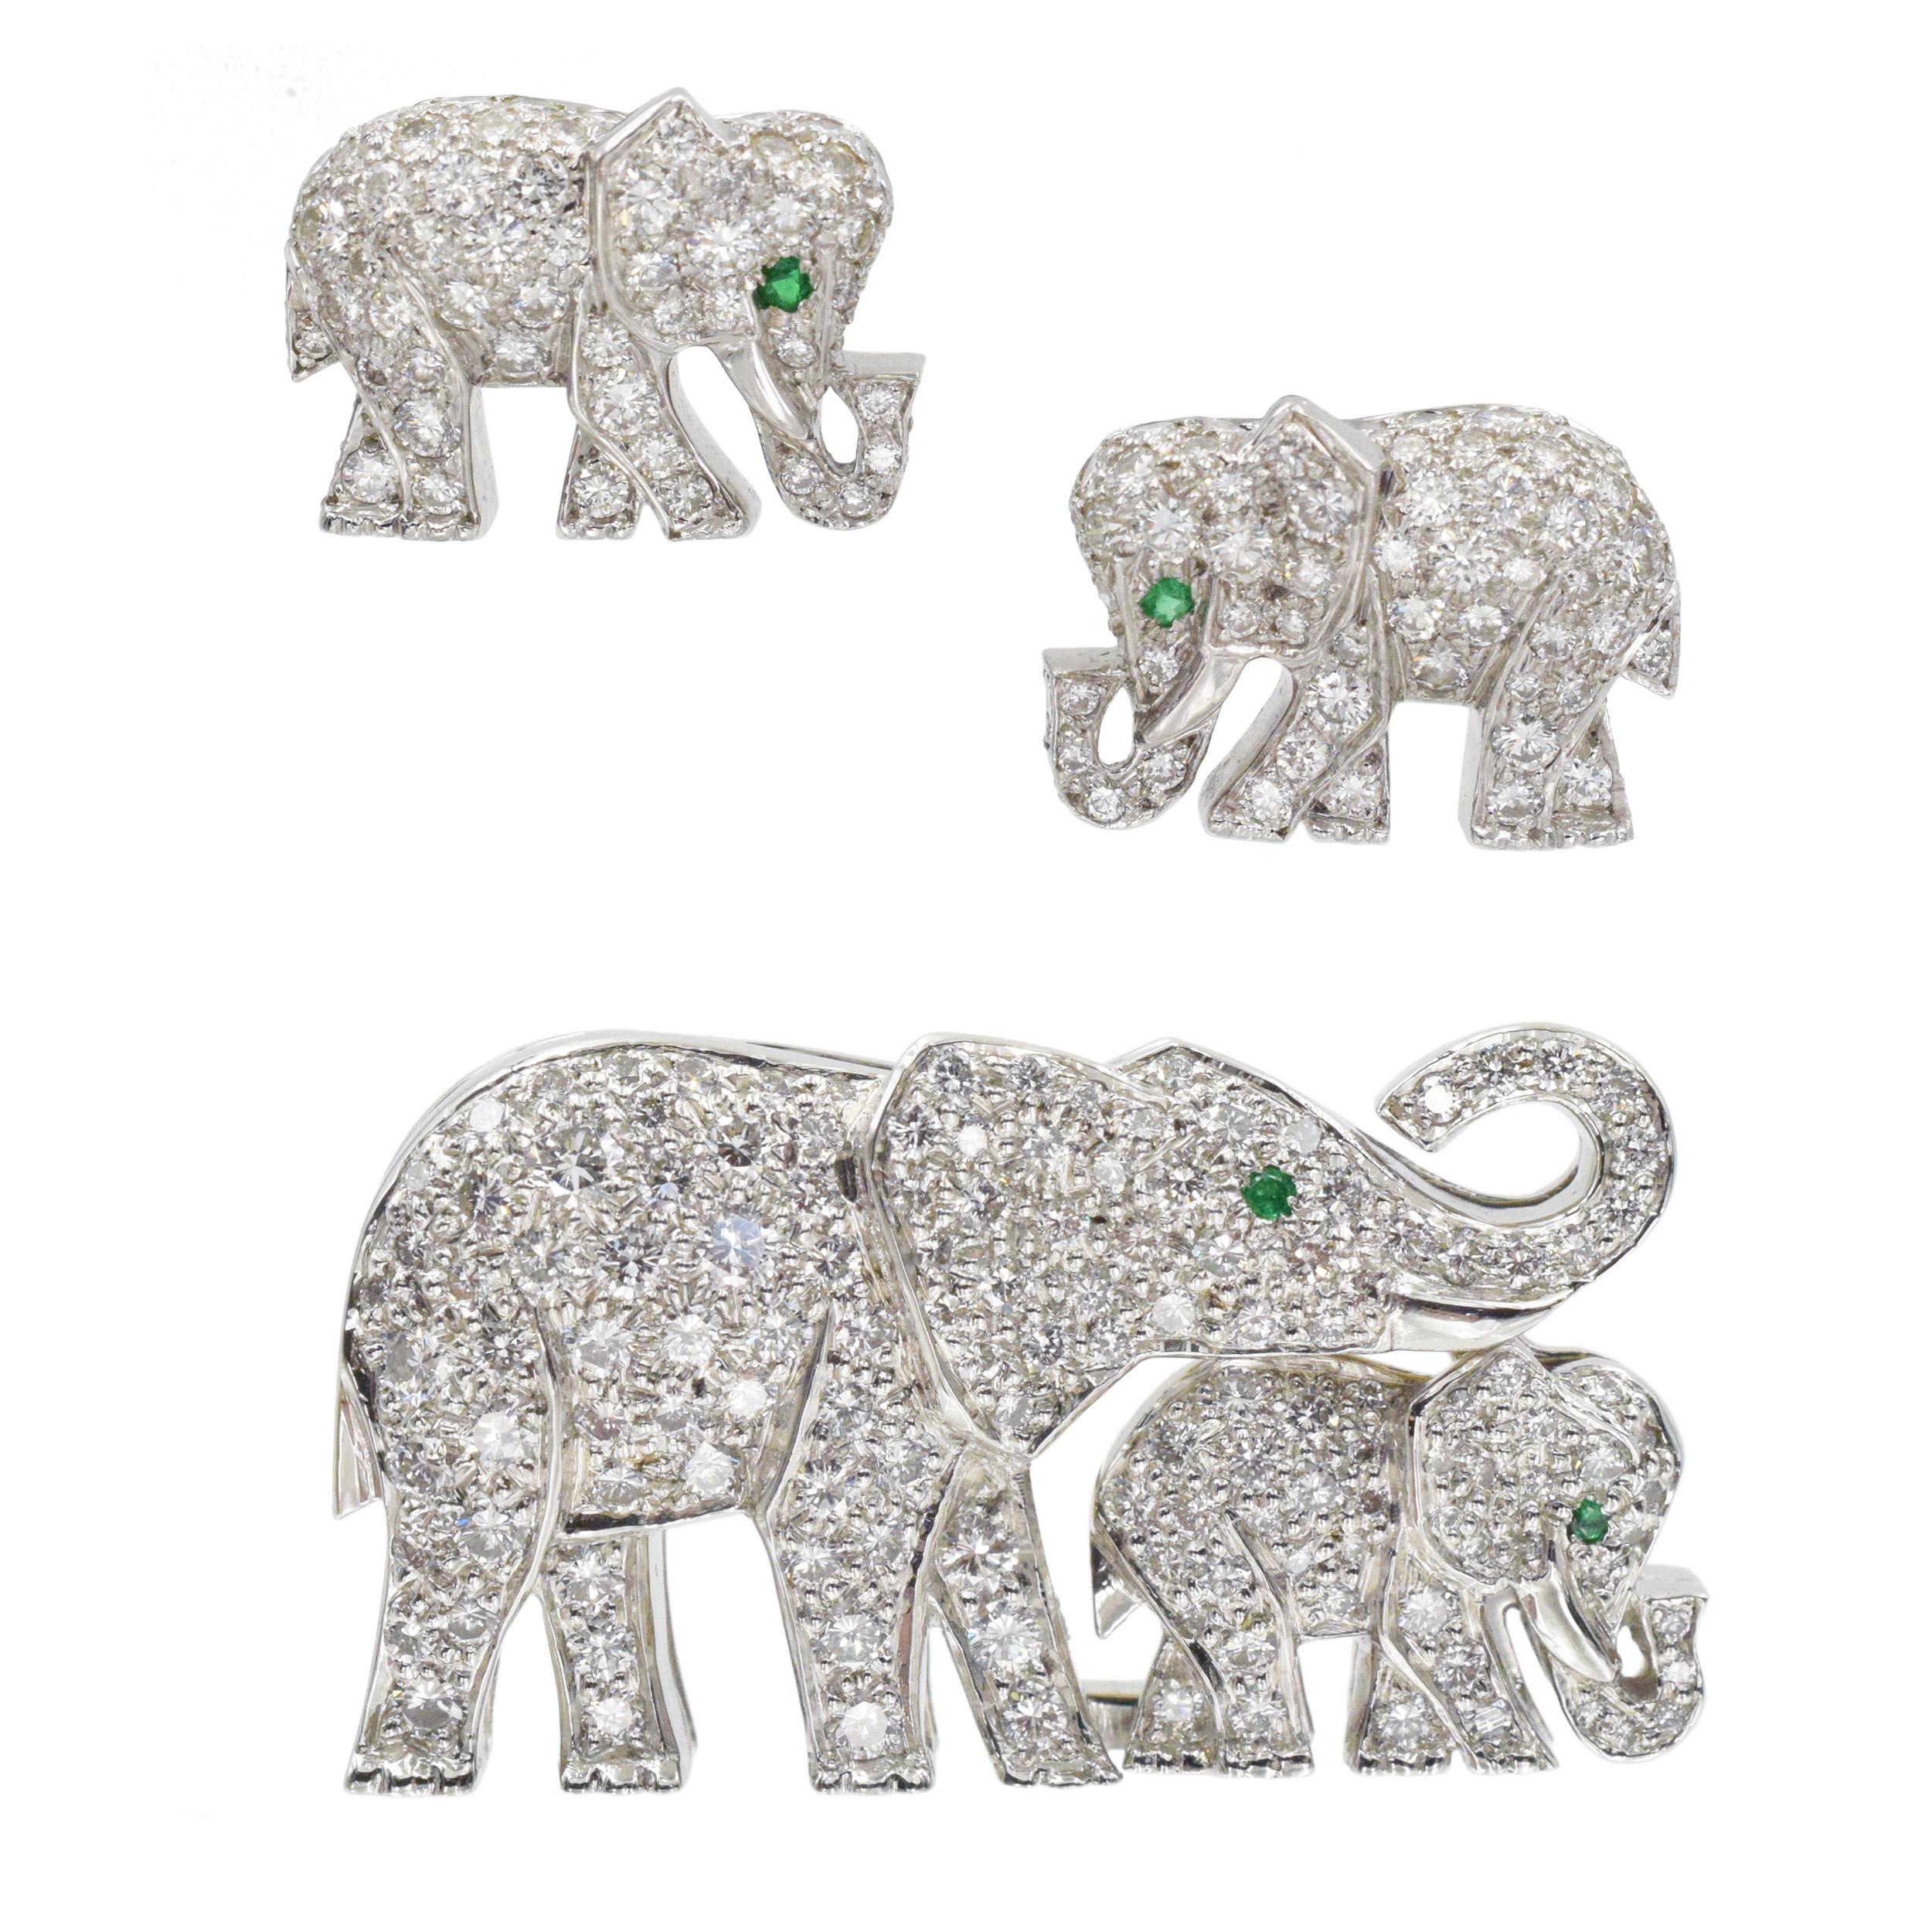 Cartier Diamond and Emerald Elephant Brooch and Earrings Set In Platinum.
 The Brooch feature mother elephant with a calf walking in front of her encrusted with 136 round brilliant cut diamonds with total weight of approximately 1.75ct and accented